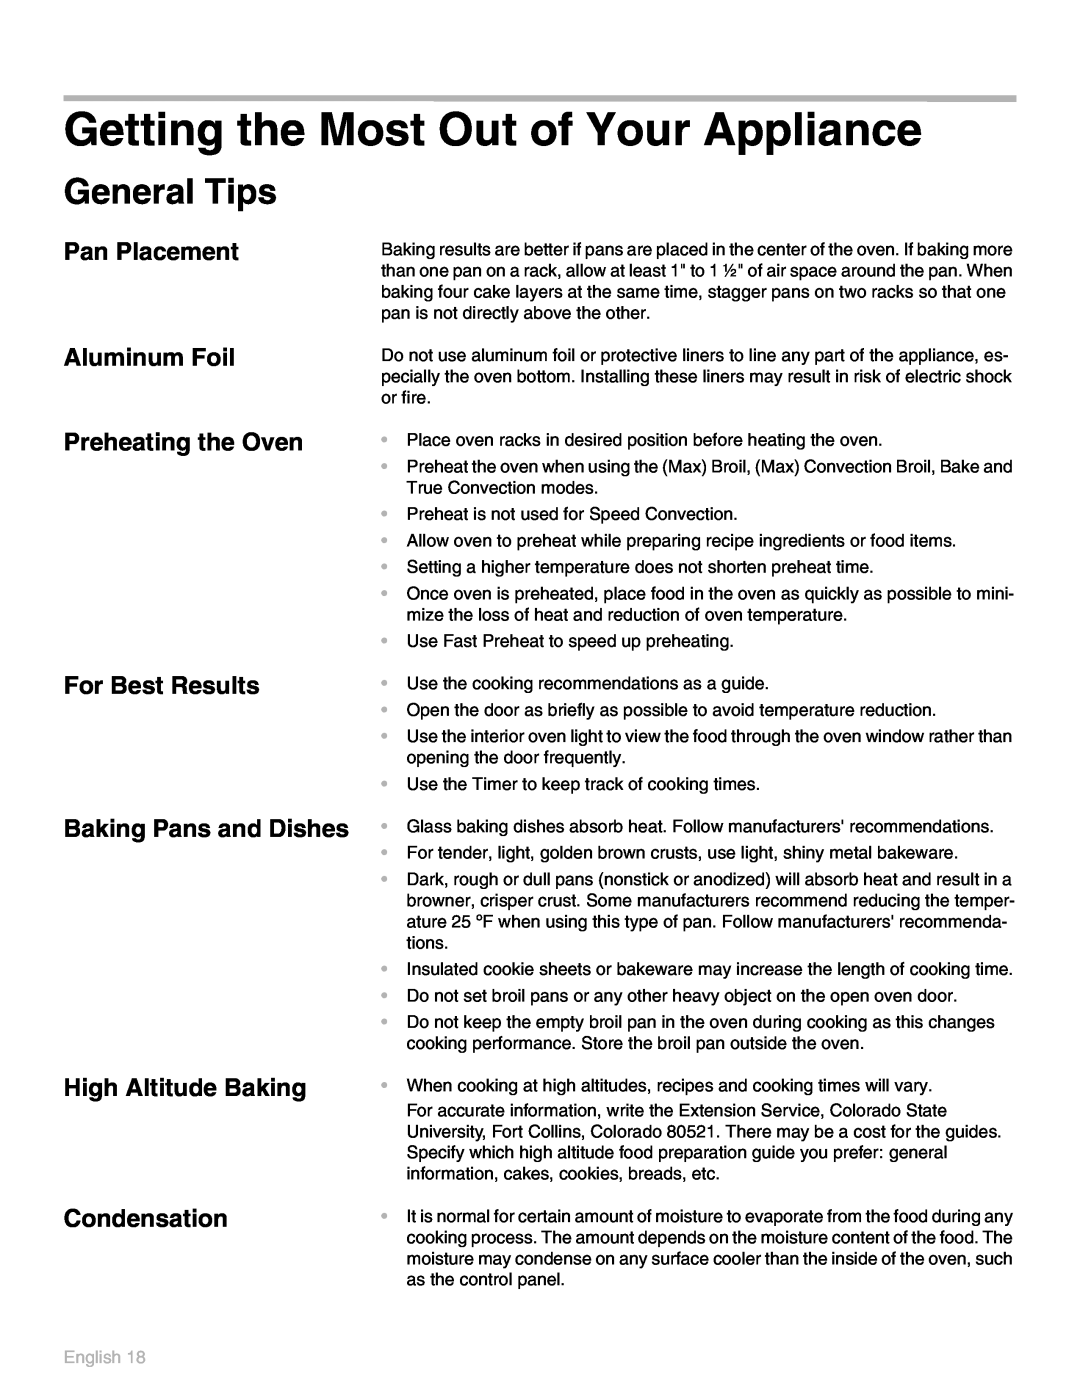 Thermador POD302 manual Getting the Most Out of Your Appliance, General Tips, English 